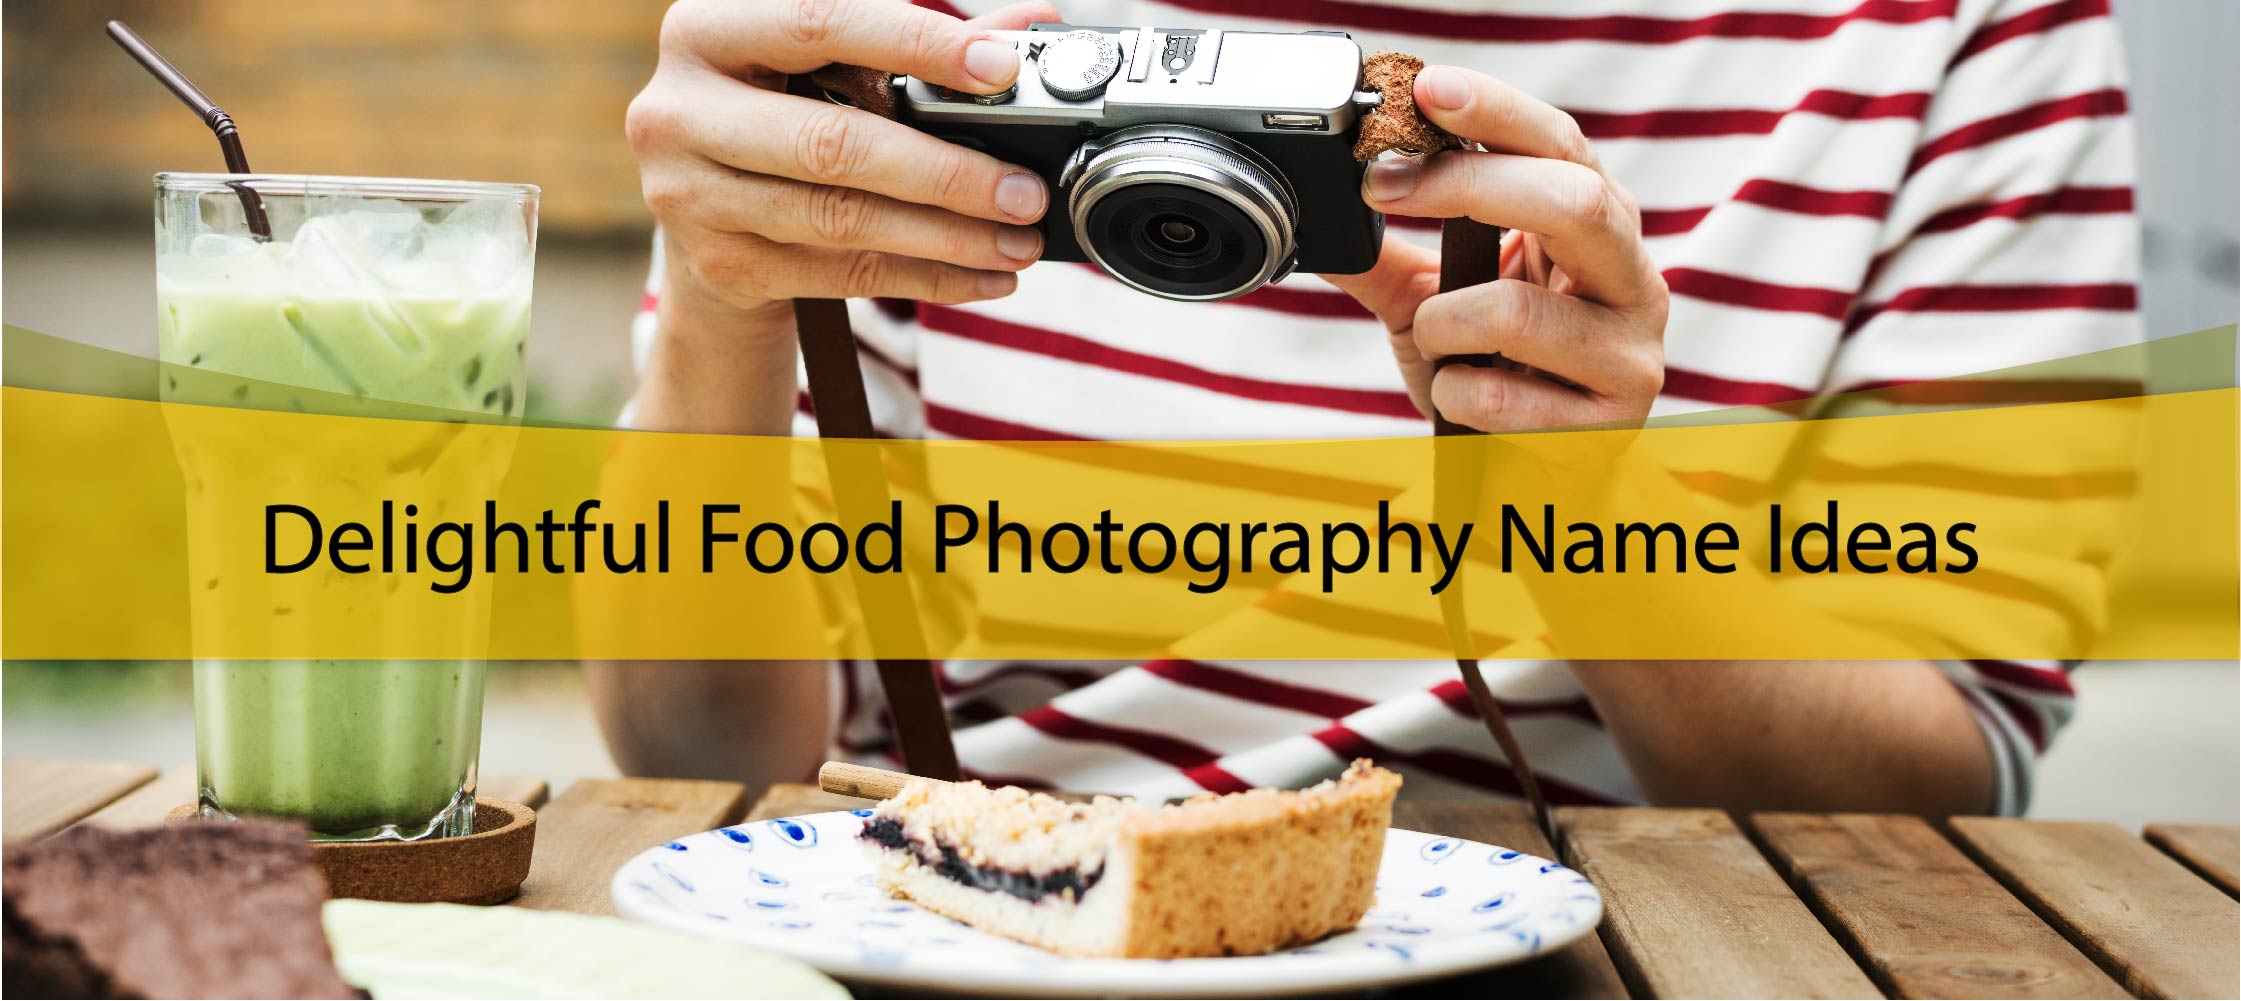 Delightful Food Photography Name Ideas